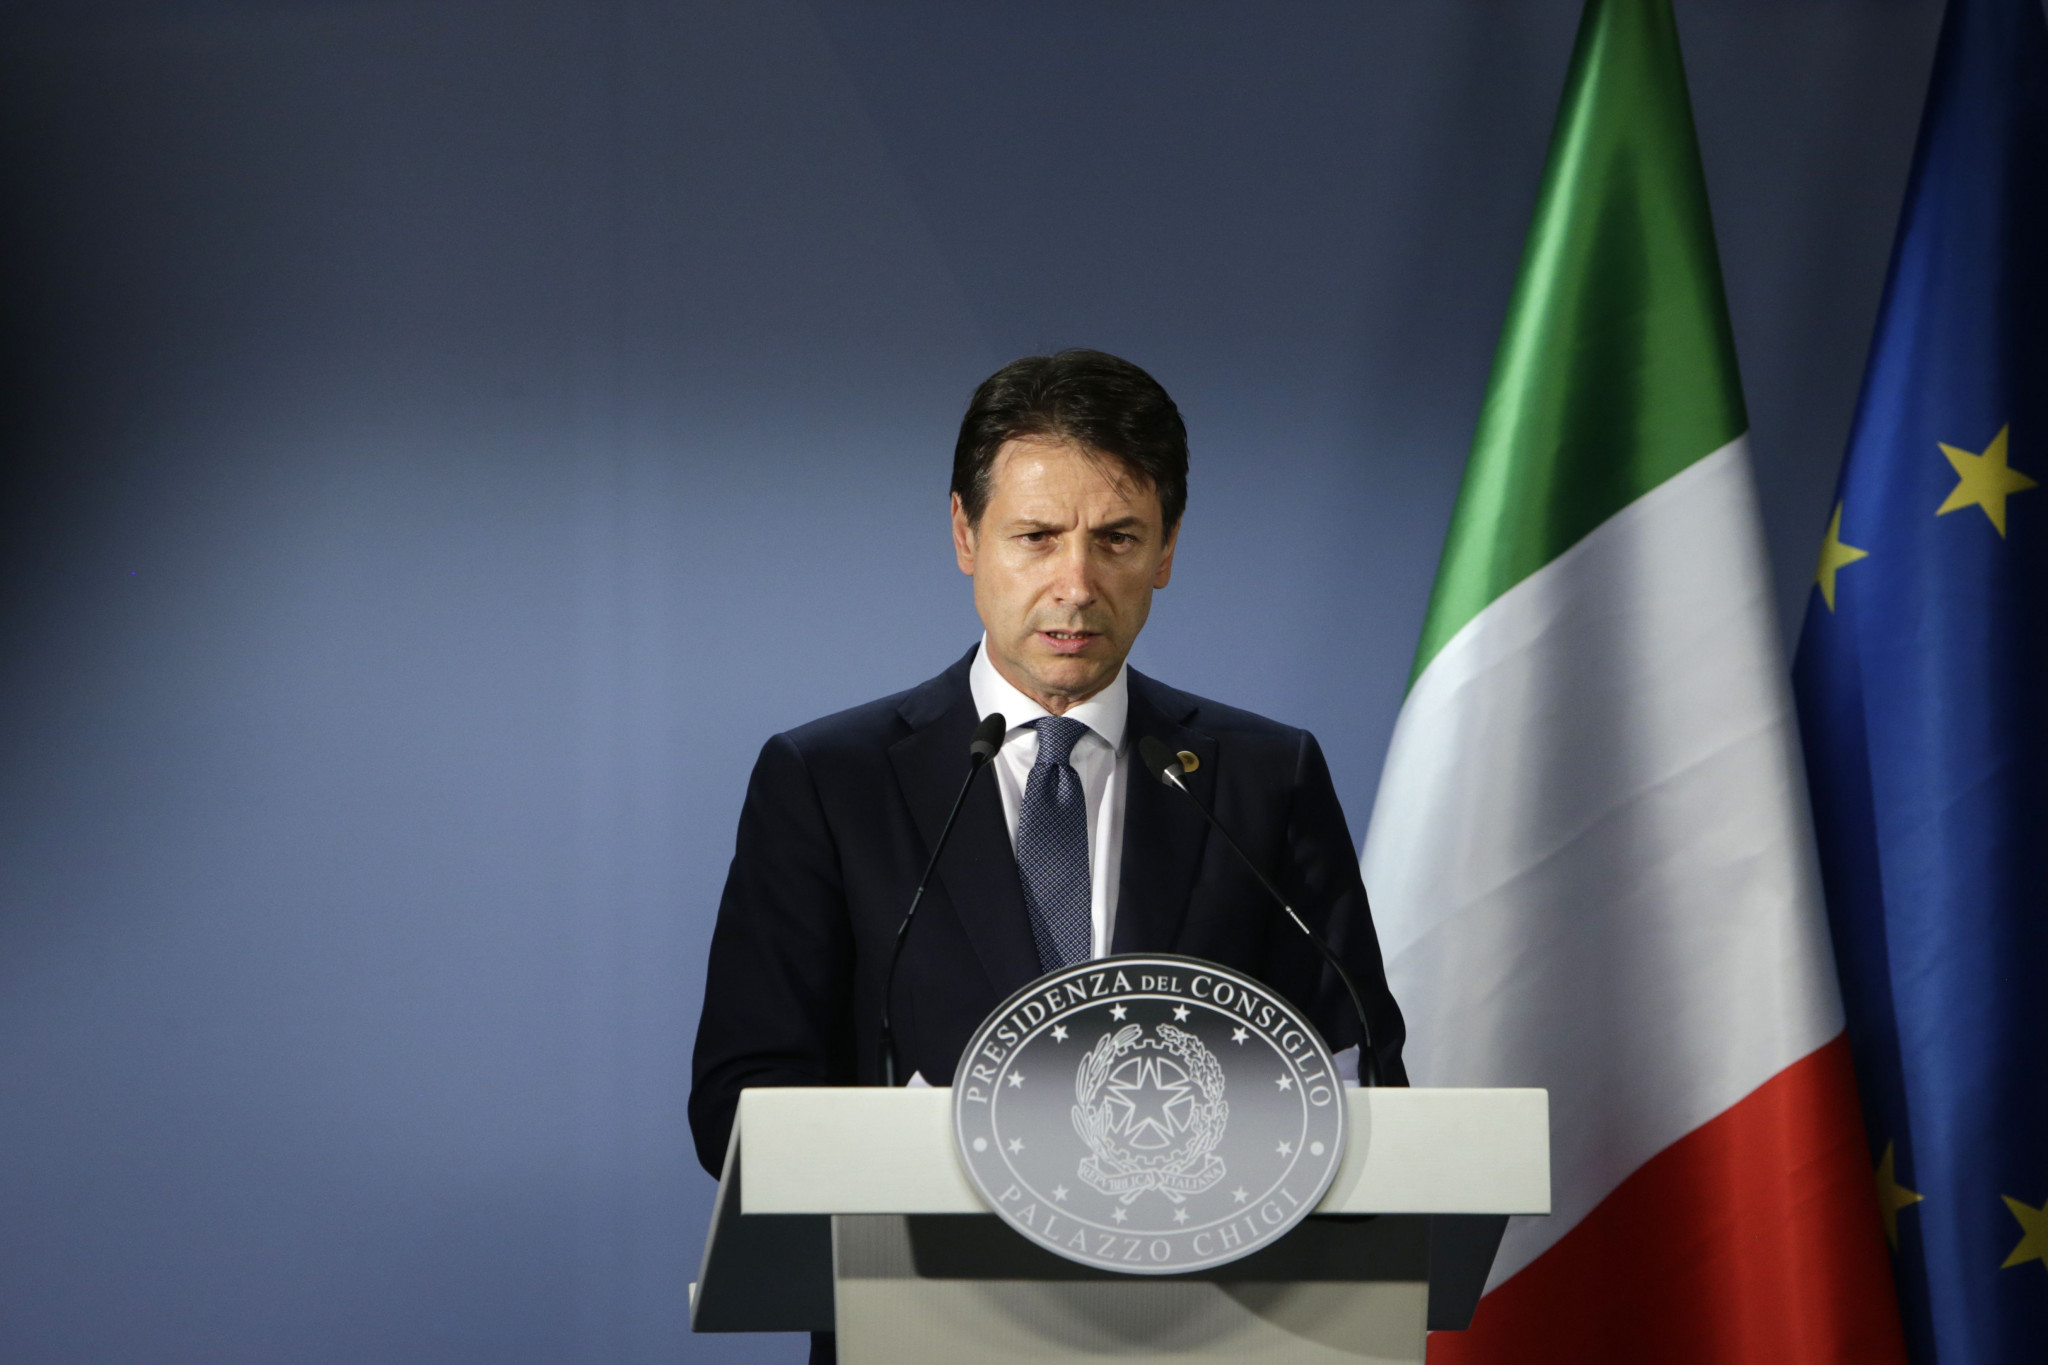 Giuseppe Conte's administration has backed the Italian bid ©Getty Images